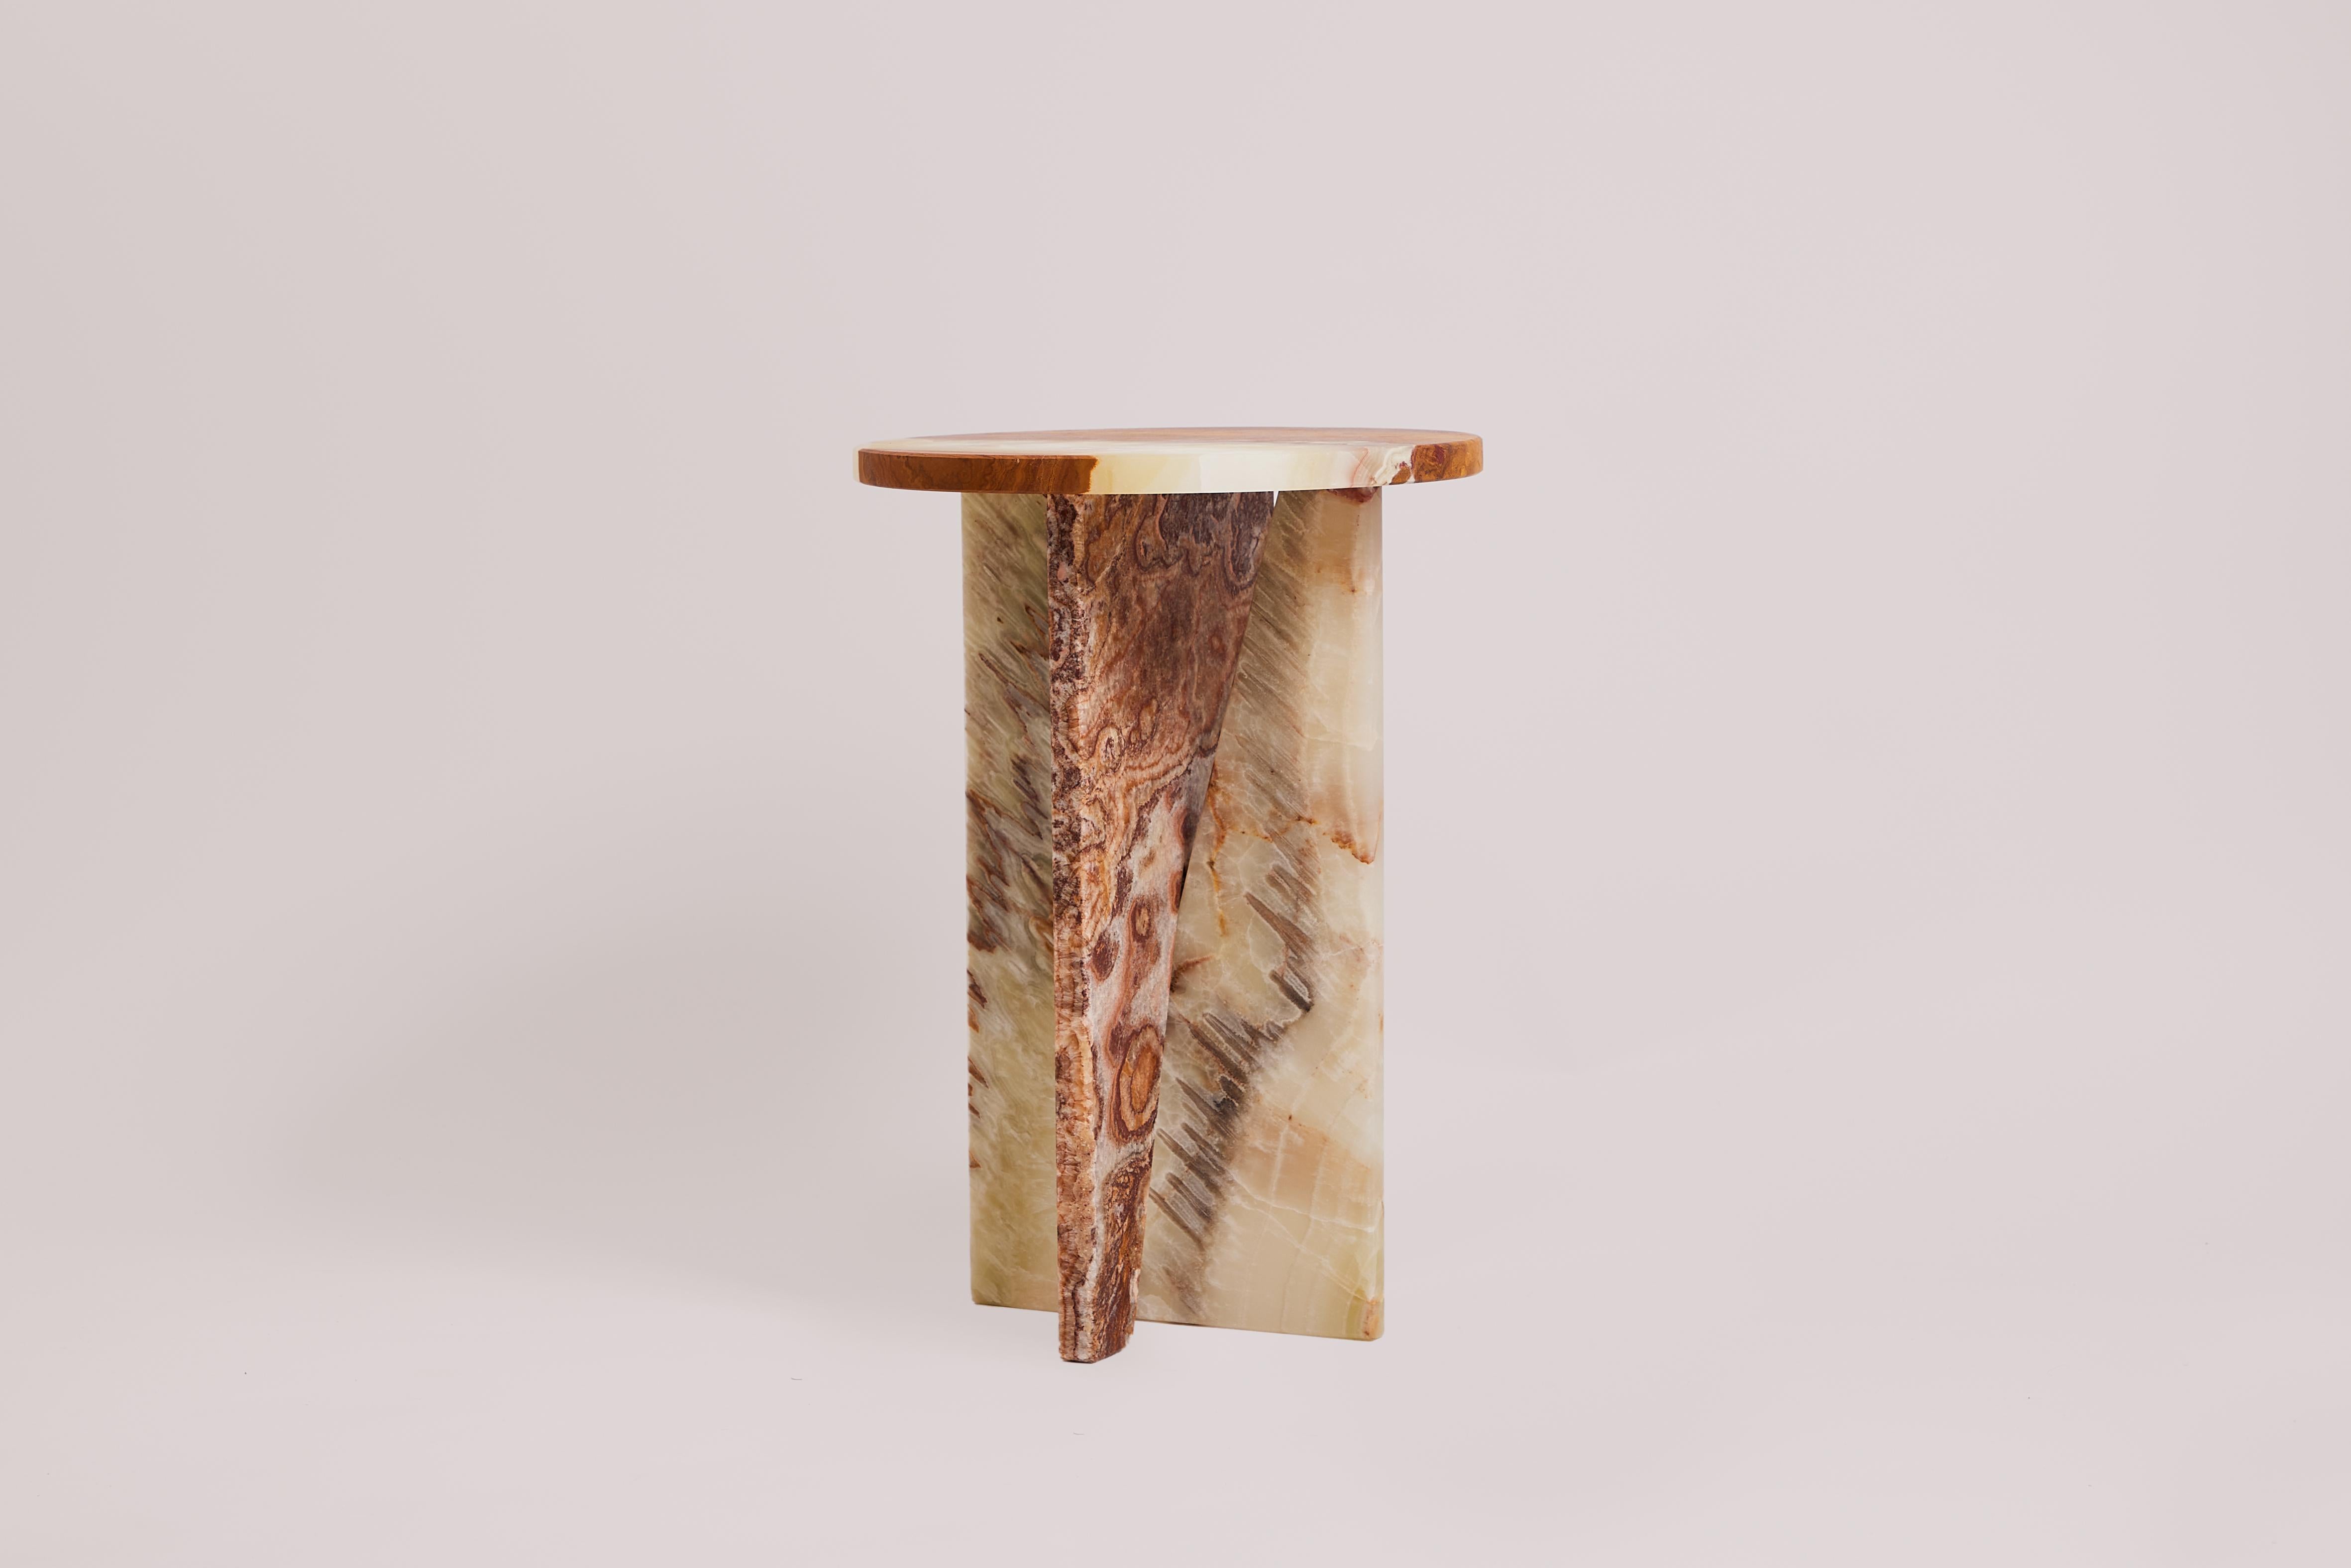 This elegant side table, designed by Studio Gaïa is a masterpiece of craftsmanship, harmoniously combining three varieties of onyx: exotic onyx, red onyx and green onyx. Each of these gemstones brings a unique aesthetic to the room, creating a